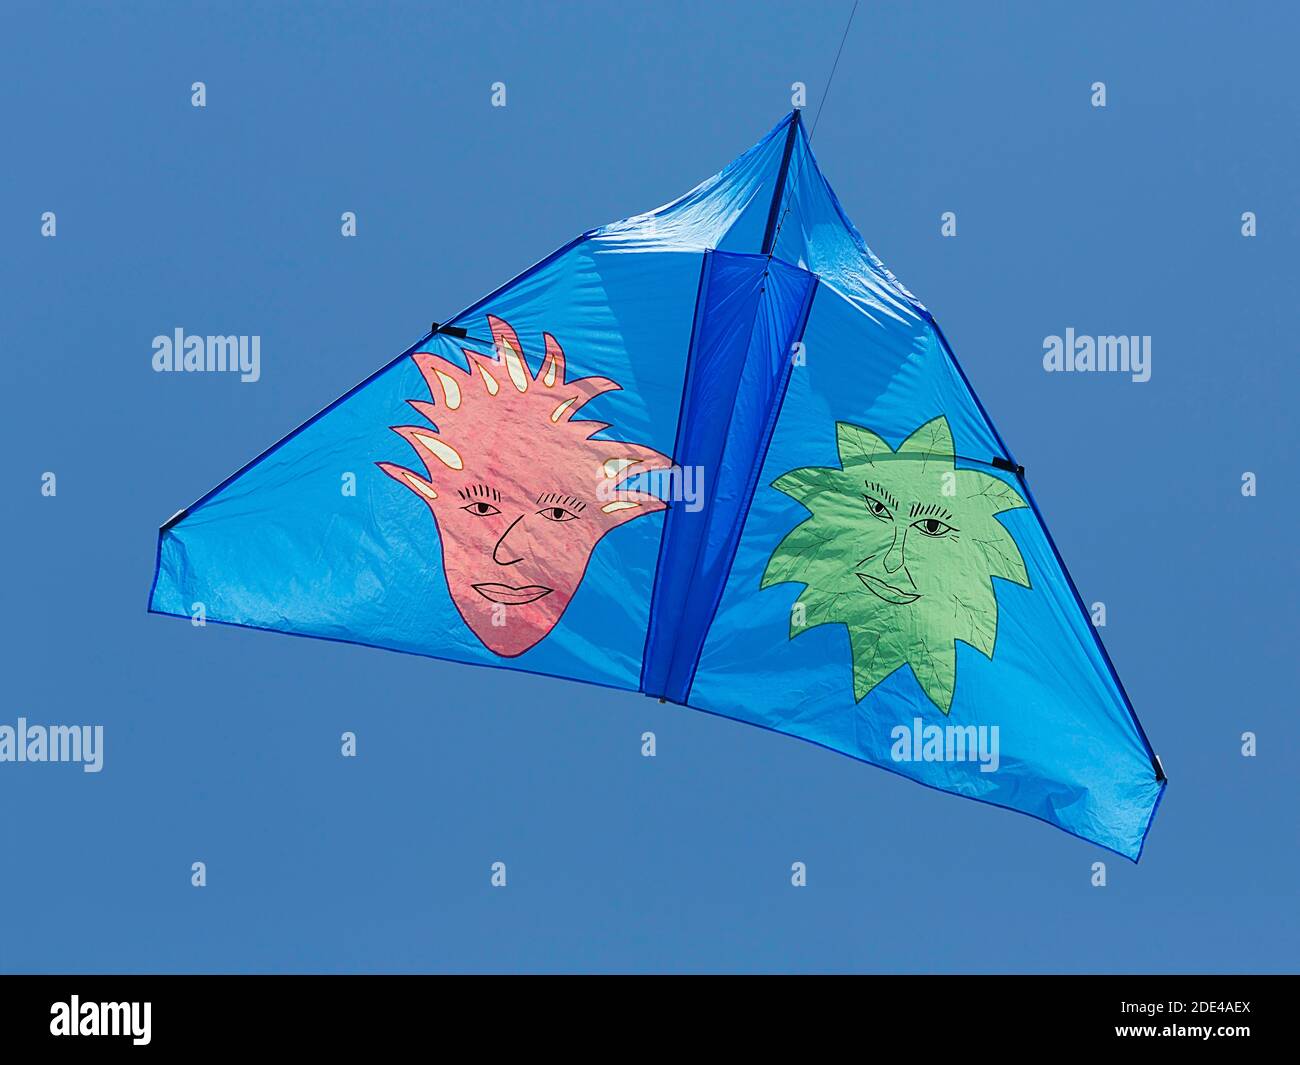 Blue kite with two imaginative faces flying in the blue sky, North Rhine-Westphalia, Germany Stock Photo